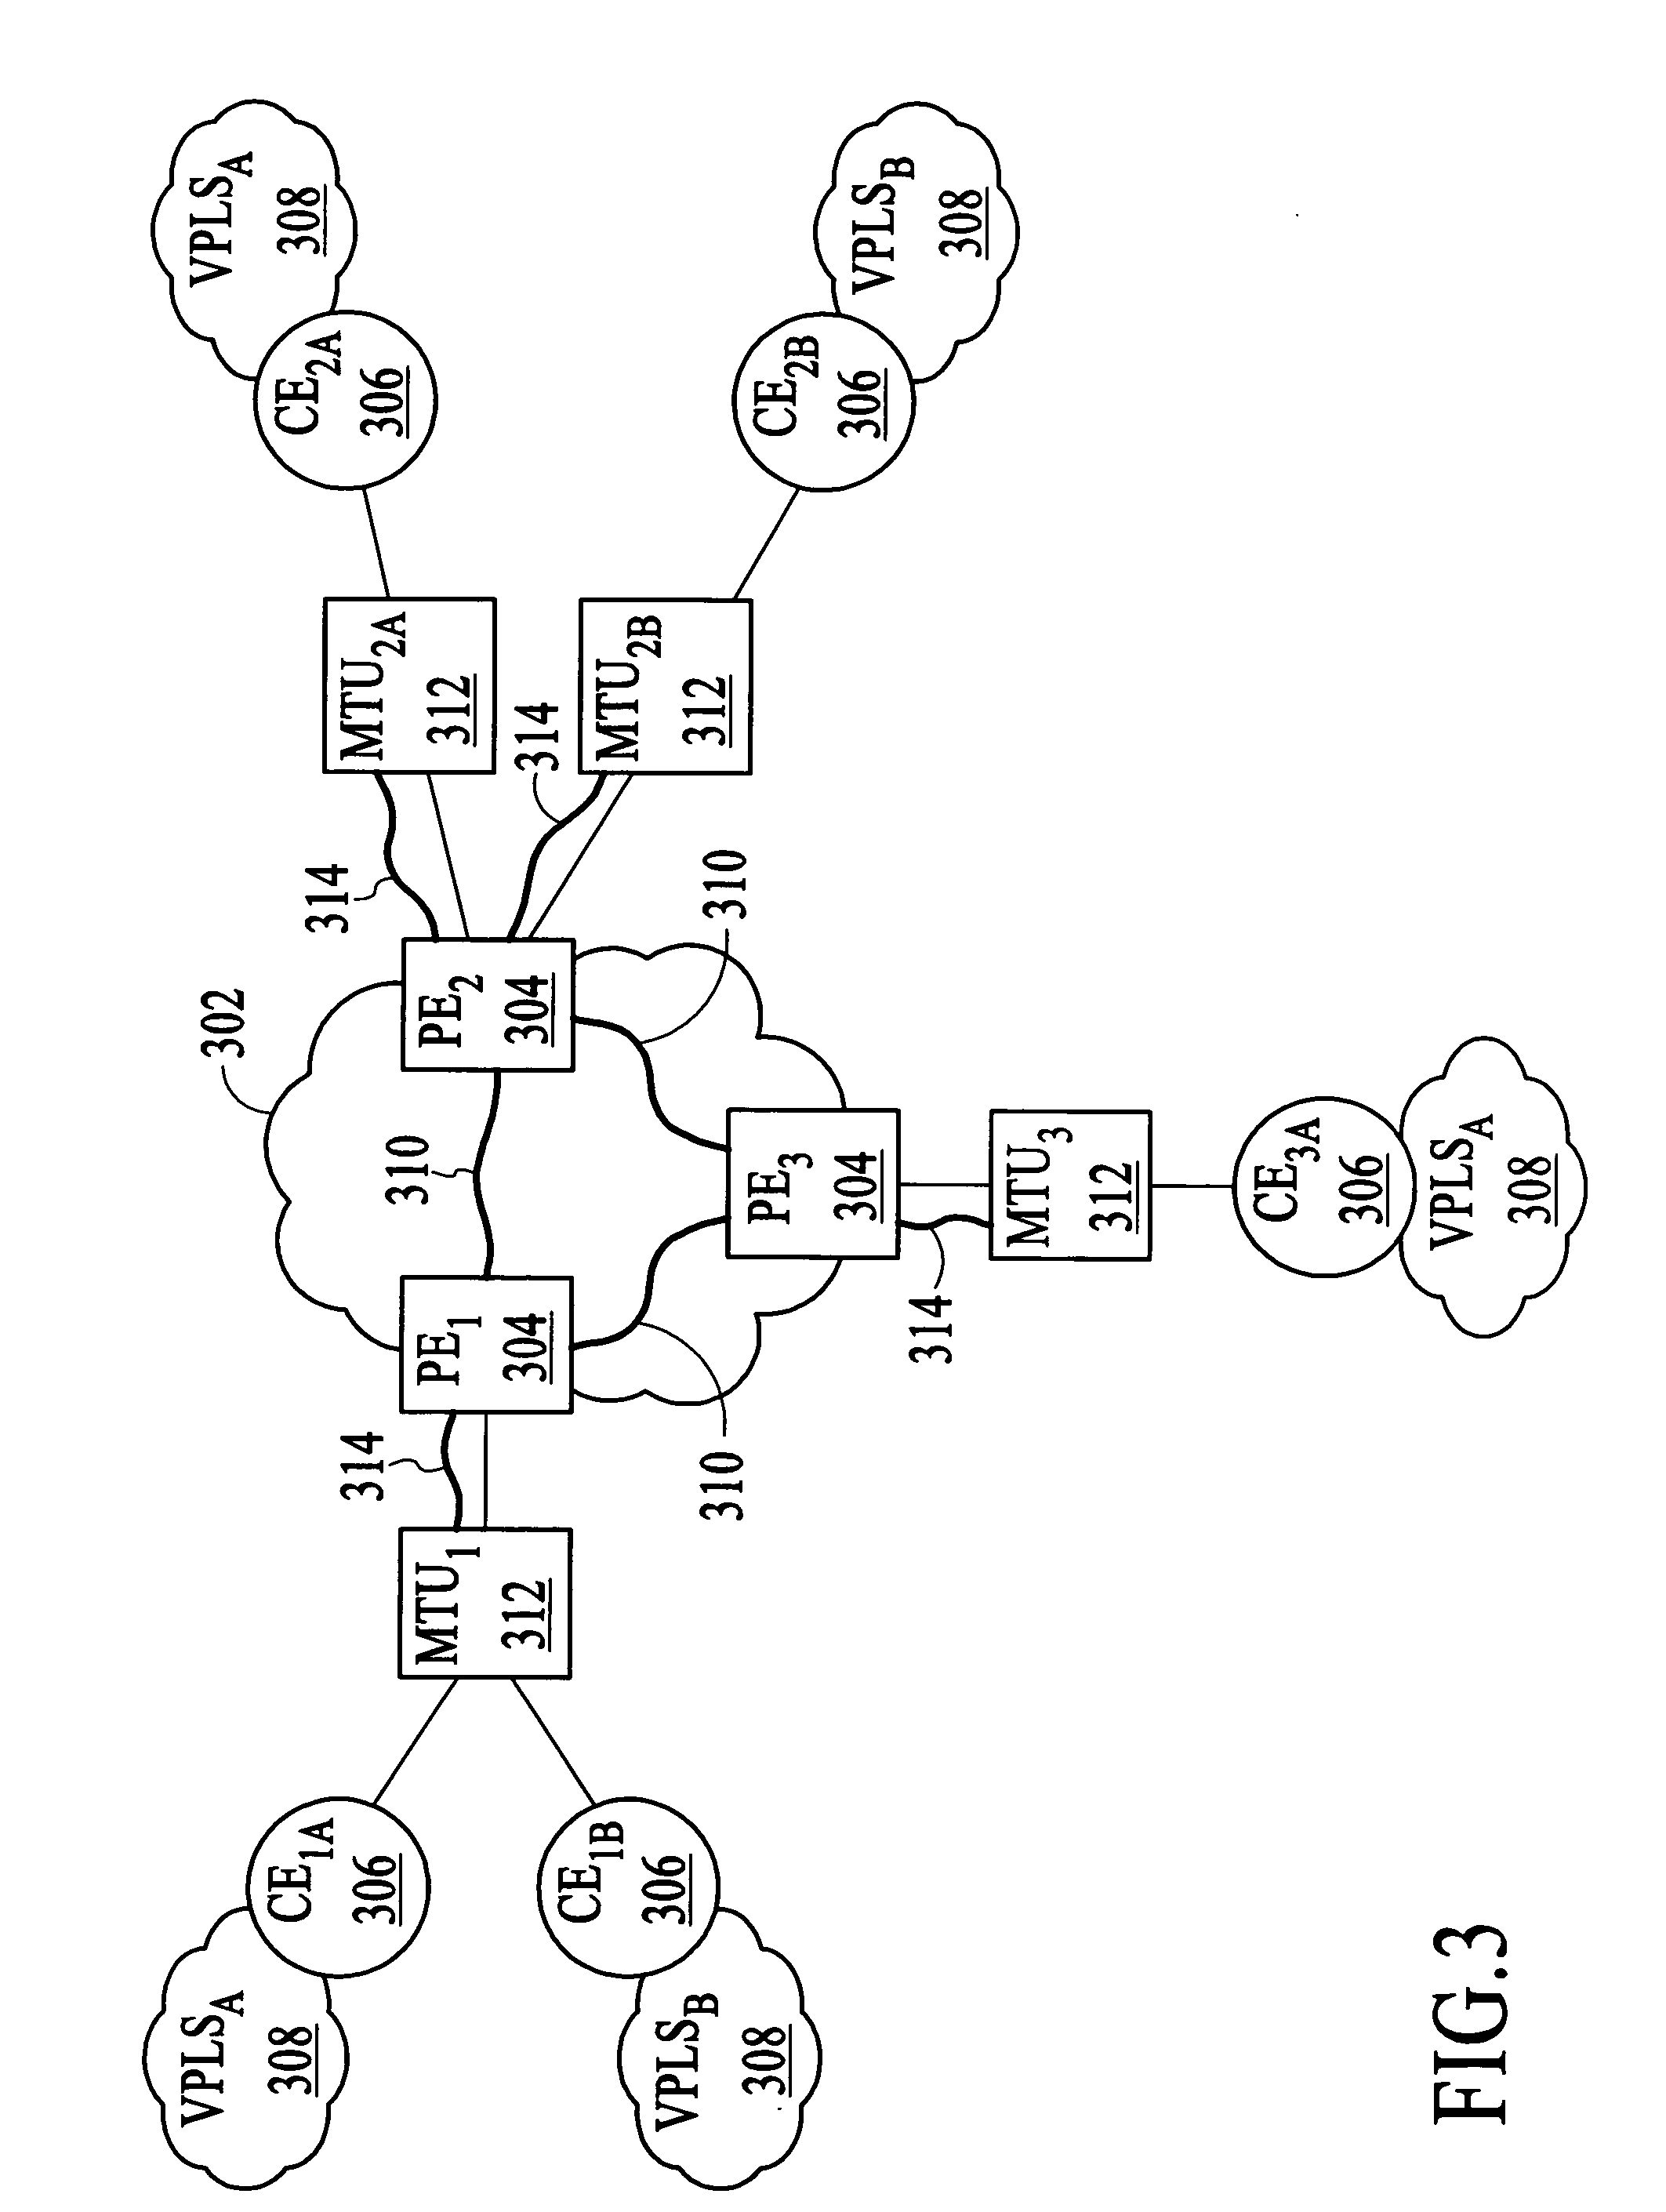 Obtaining path information related to a virtual private LAN services (VPLS) based network